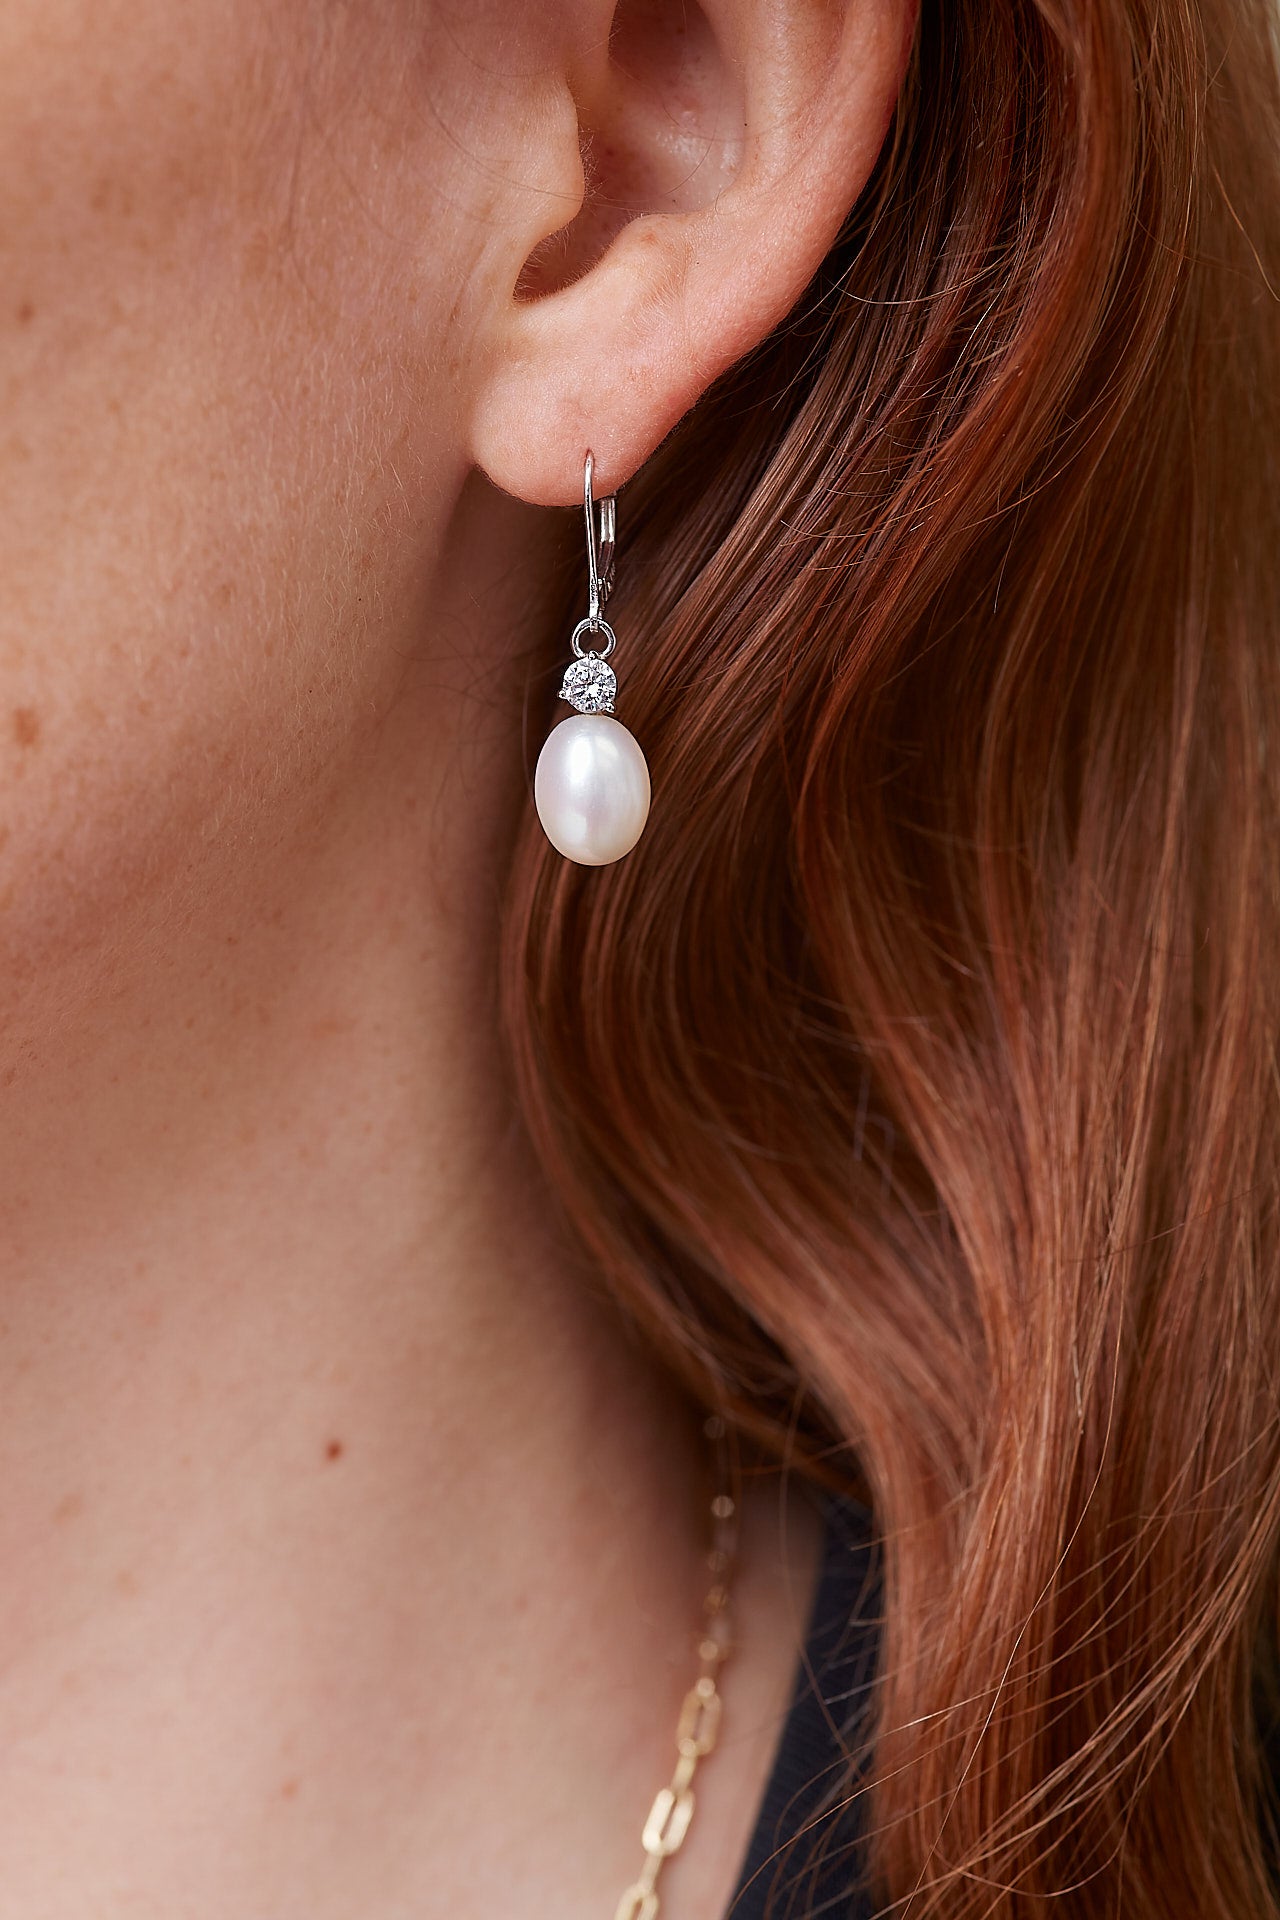 Stella cultured freshwater pearl drop earrings with cubic zirconia above on 14kt white gold levers